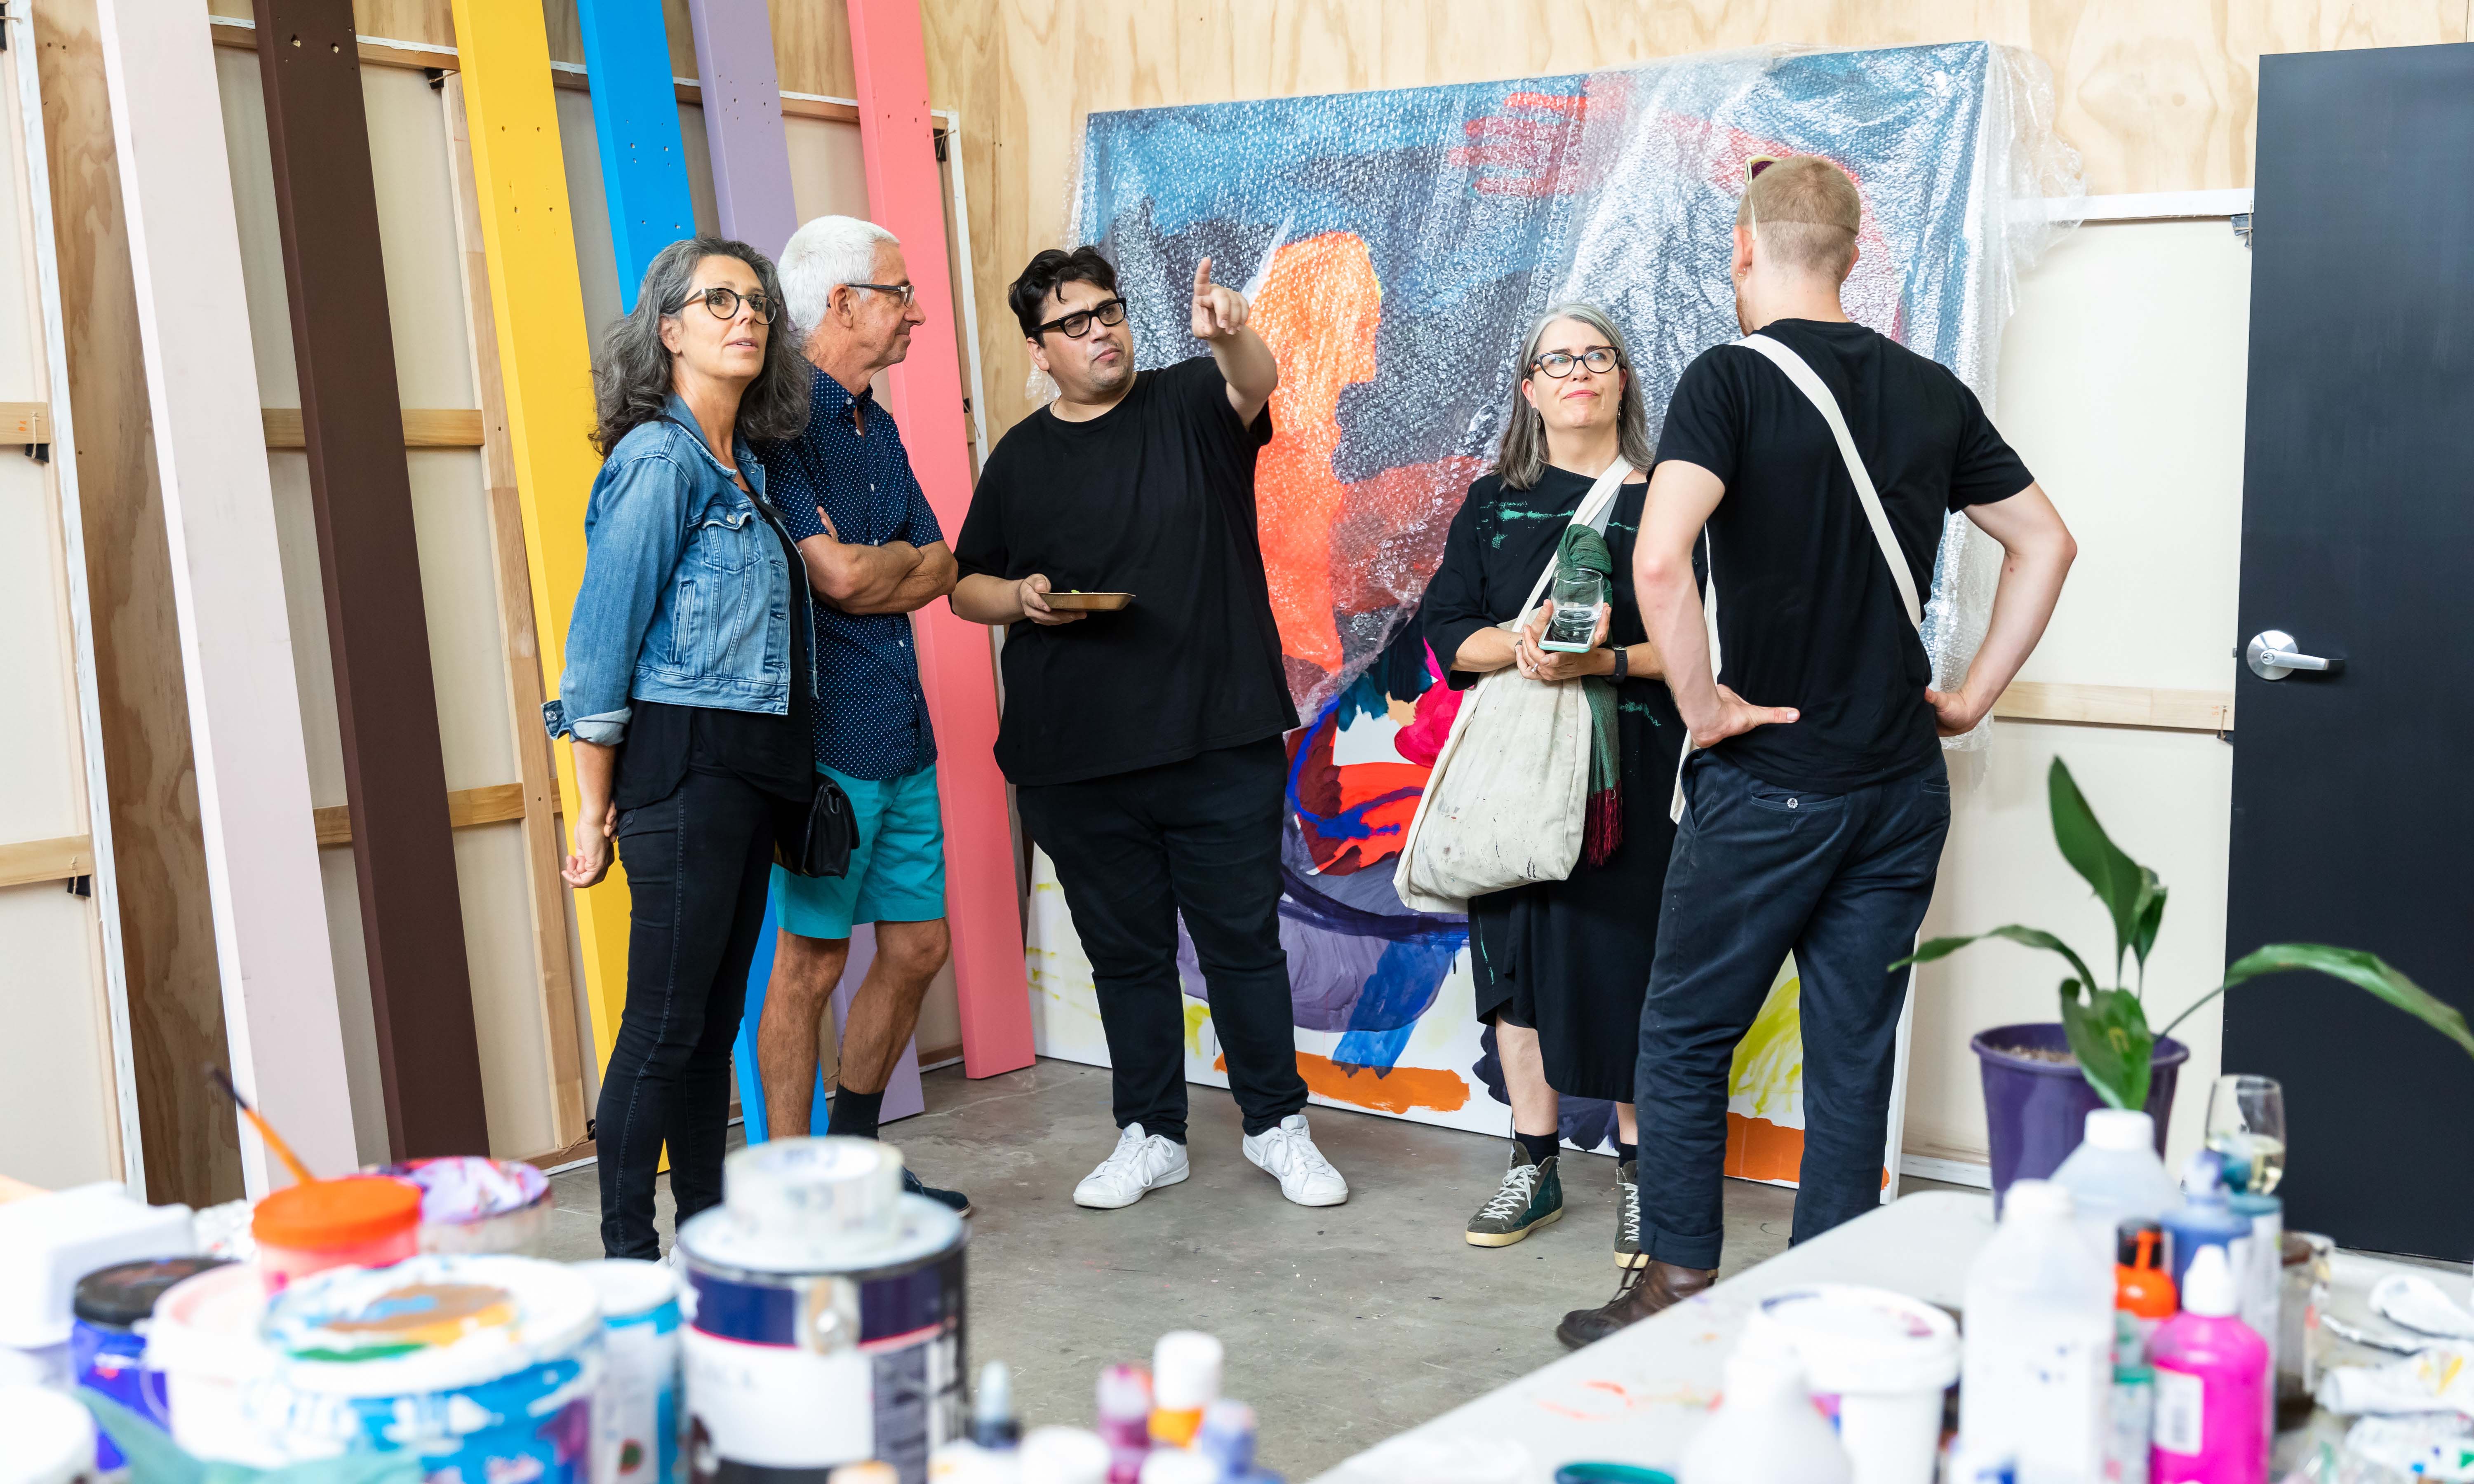 A group of people in a studio filled with bright paintings